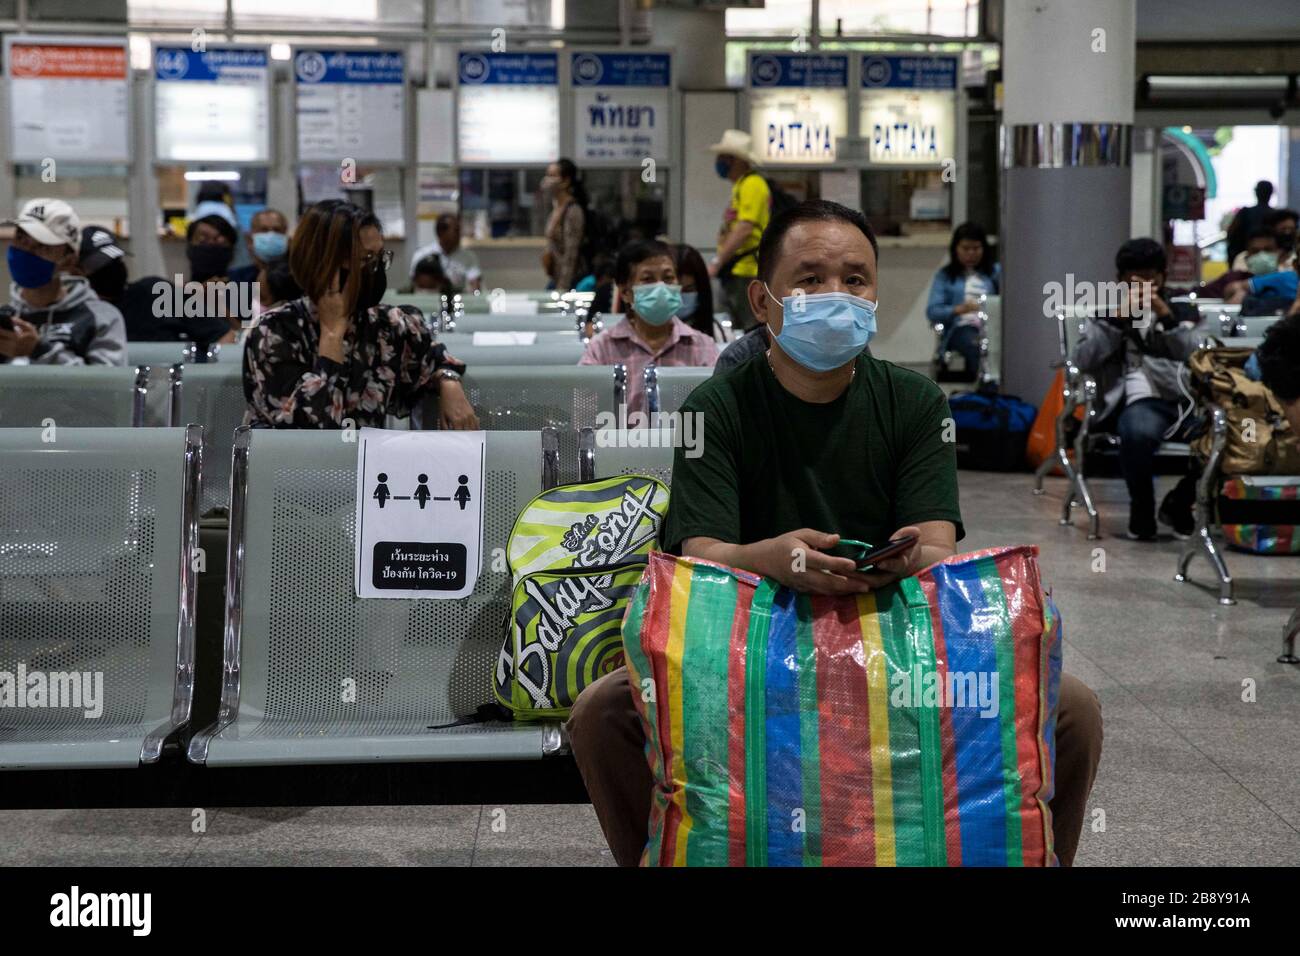 Bangkok, Bangkok, Thailand. 23rd Mar, 2020. Social distancing signs placed on seats in Bangkok's Mochit bus terminal. The travel hub was filled with thousands of travelers heading back to their home provinces after the city government ordered the mandatory closure of many nonessential businesses on March 22nd, 2020 in an effort to slow the spread of the Covid-19 virus. Large portions of the capital's workforce live paycheck to pay check, making staying in the city financially impossible due to their sudden lack of employment. Credit: ZUMA Press, Inc./Alamy Live News Stock Photo